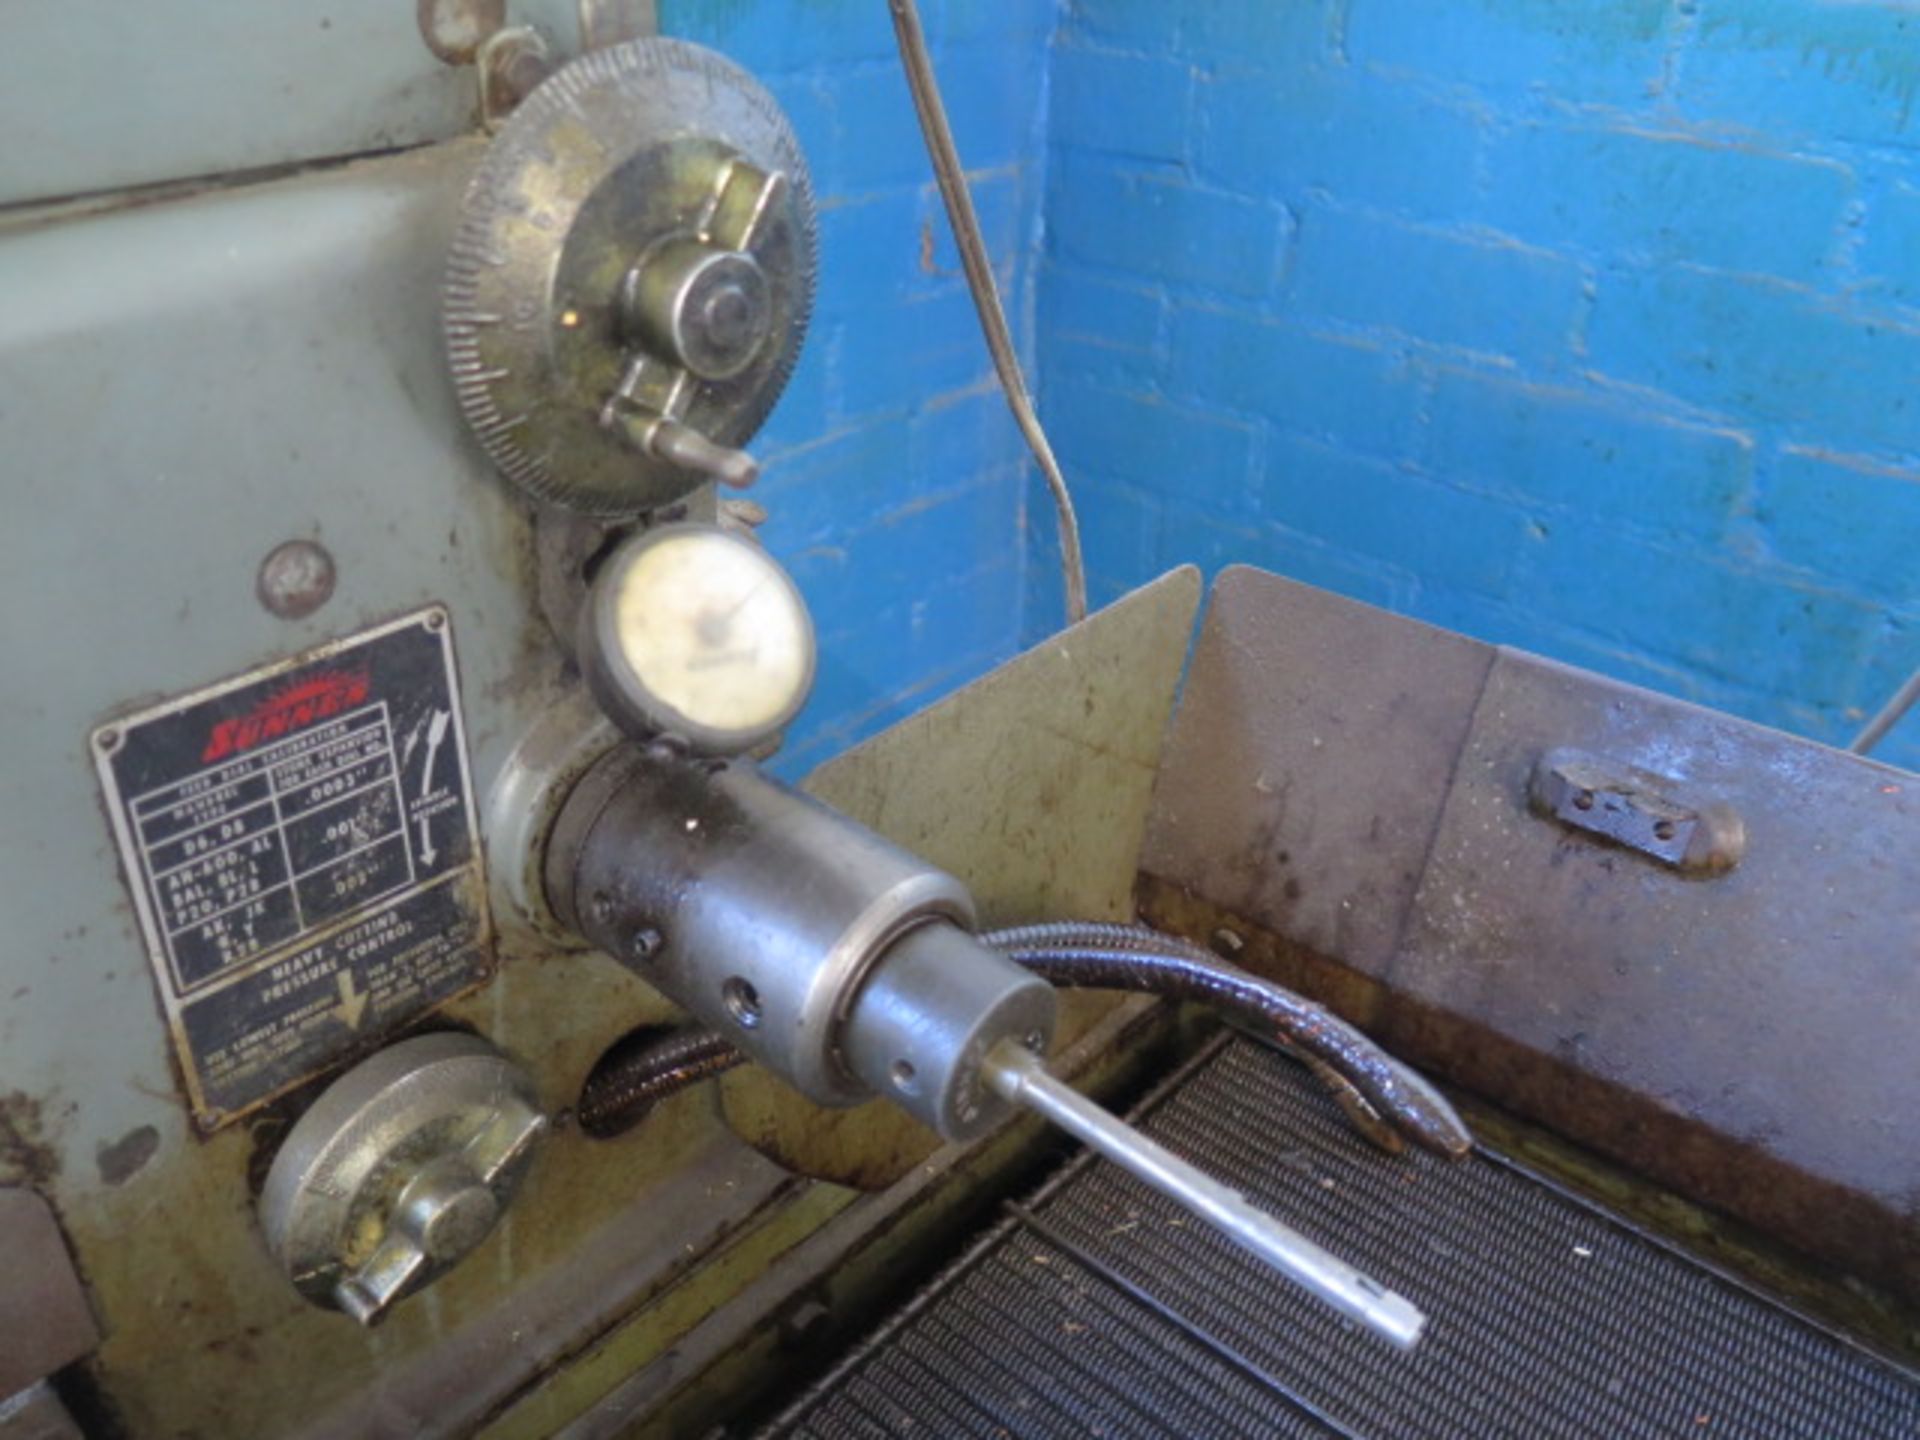 Sunnen MBB-1600 Precision Honing Machine s/n 43802 w/ Coolant (SOLD AS-IS - NO WARRANTY) - Image 5 of 8